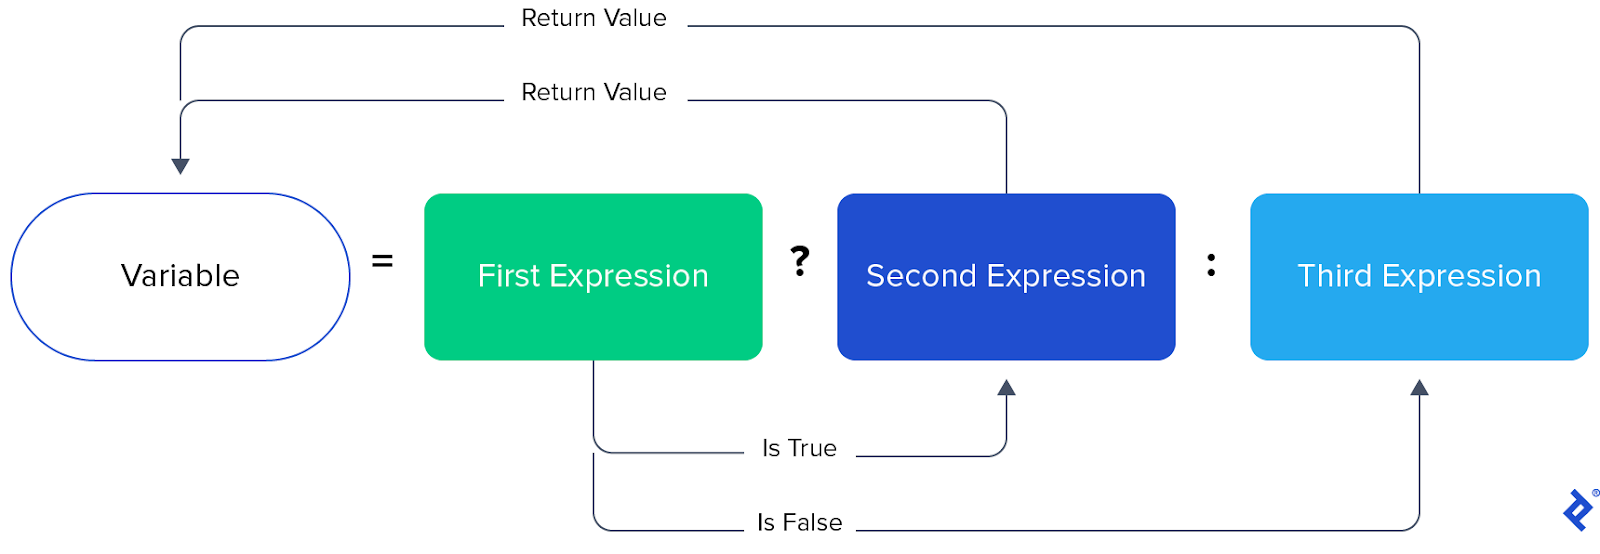 From left to right are shown a white Variable oval, an equals sign, a green First Expression box, a question mark, a dark blue Second Expression box, a colon, and a light blue Third Expression box. The First Expression box has two arrows: one labeled “Is True” points to the Second Expression box, and the second labeled “Is False” points to the Third Expression box. Second Expression and Third Expression each have their own Return Value arrow pointing to the Variable oval.